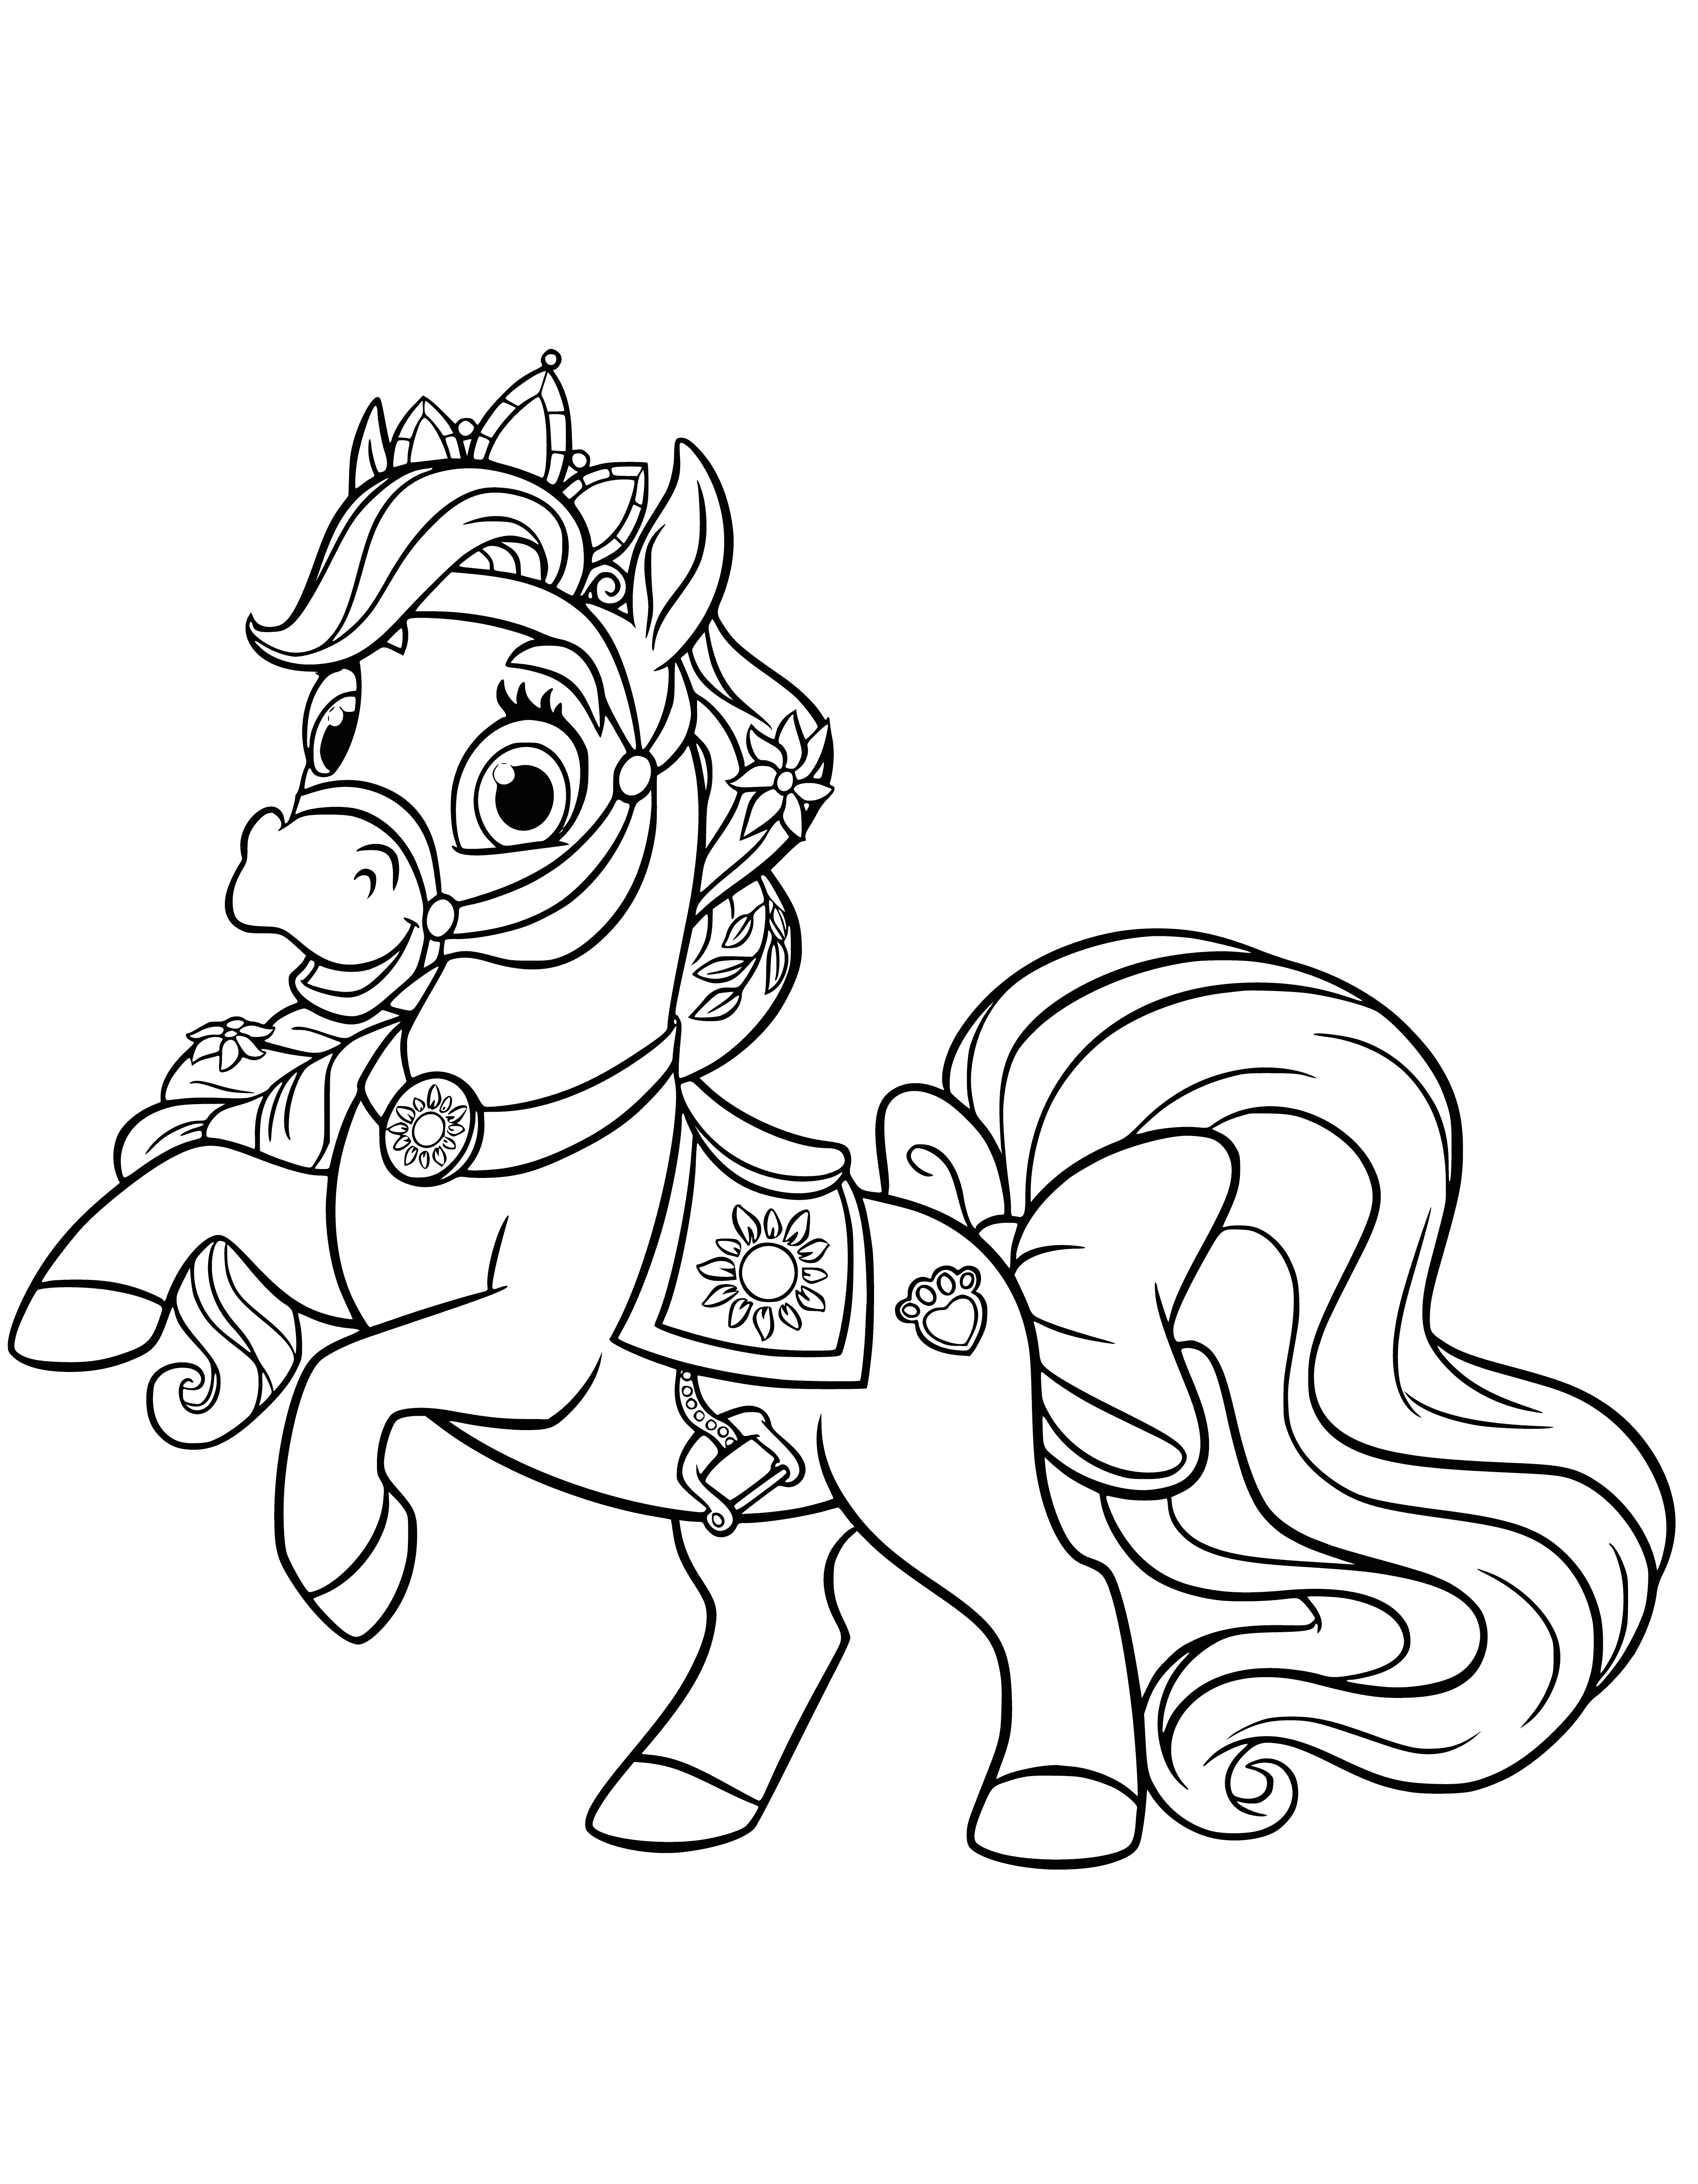 coloring page: Rapunzel petting Pony Asterisk, a light brown pet with a white star and long, blonde mane and tail wearing a pink saddle and purple blanket.